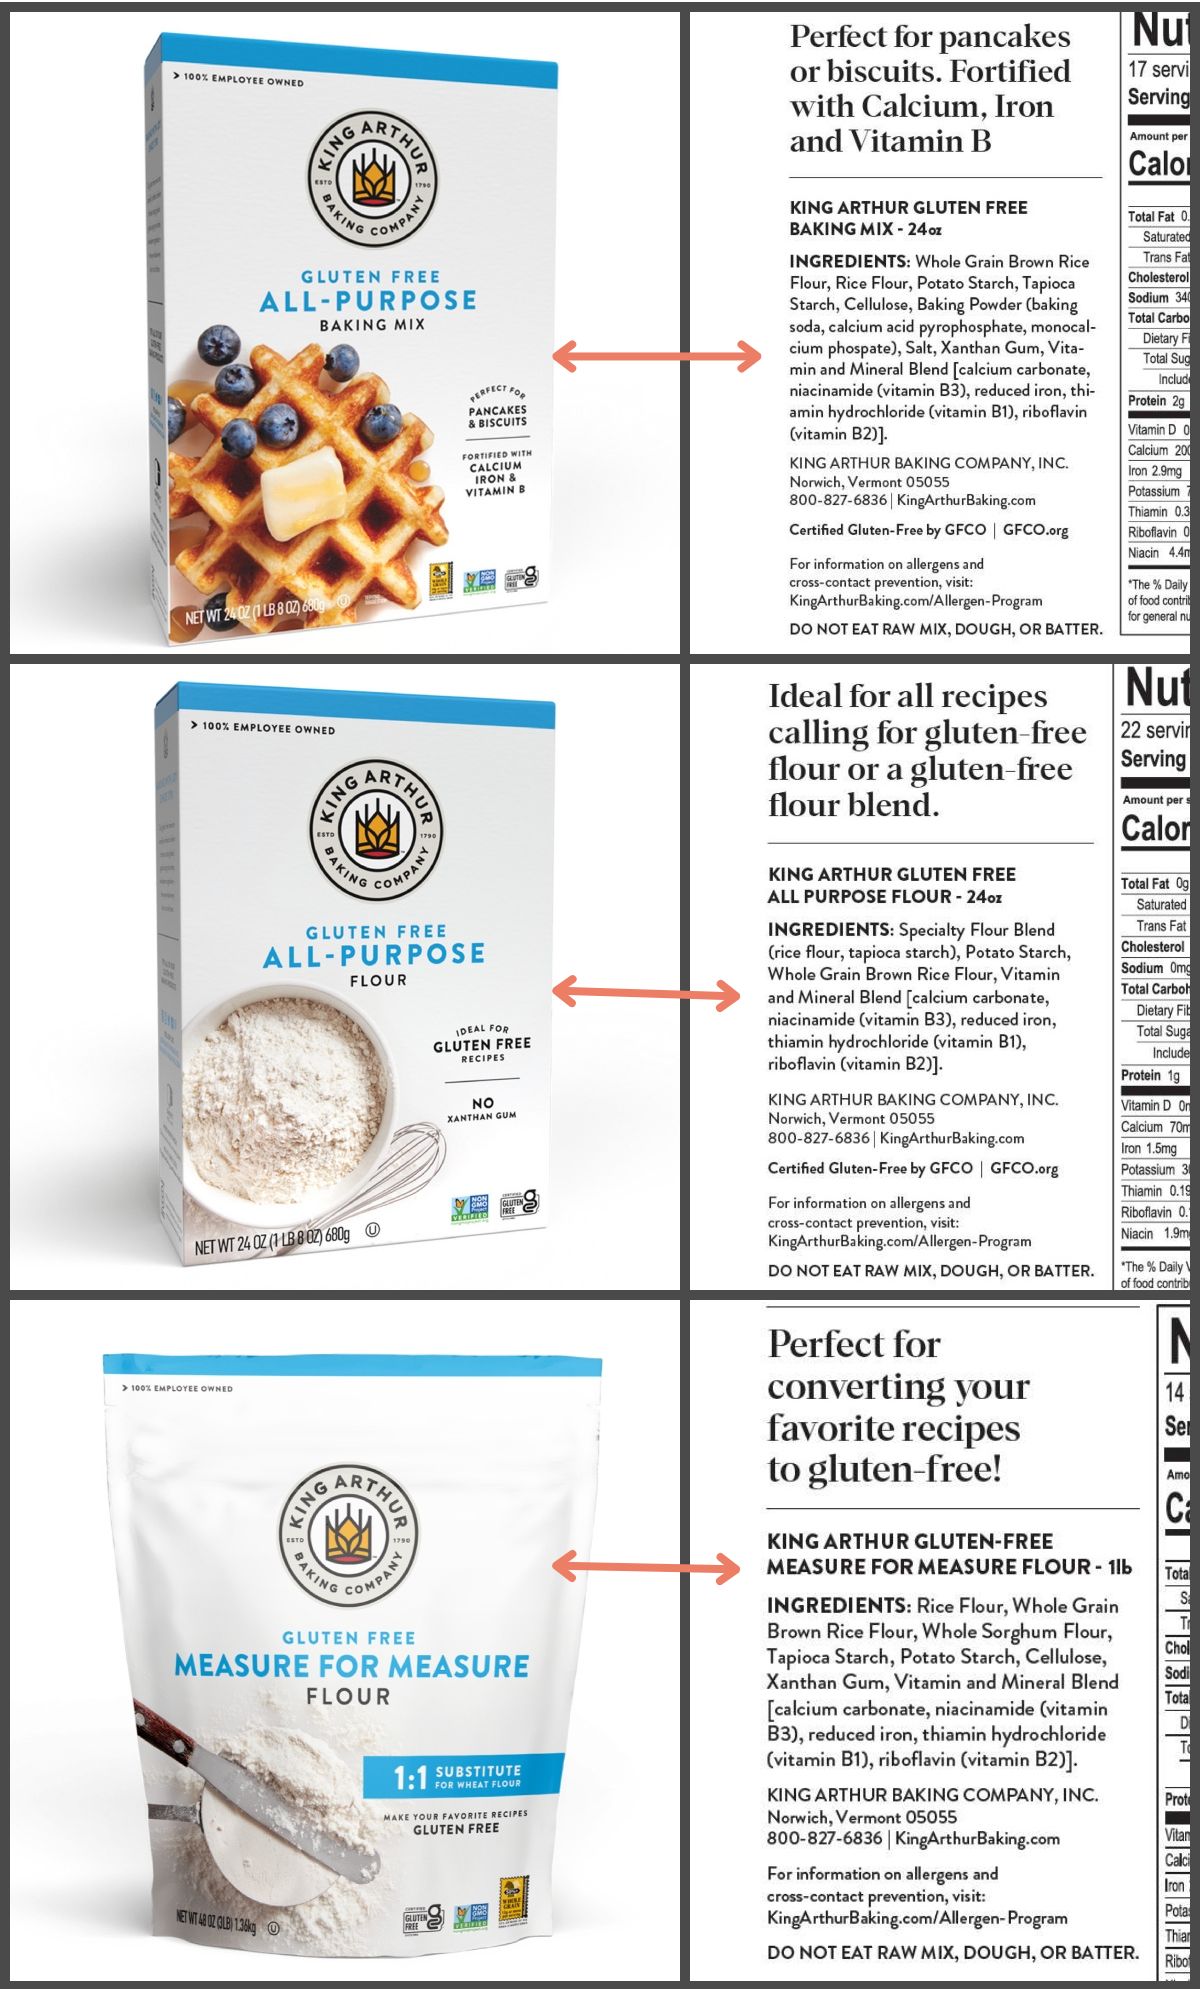 Chart comparing different king arthur gluten free flours and mixes.